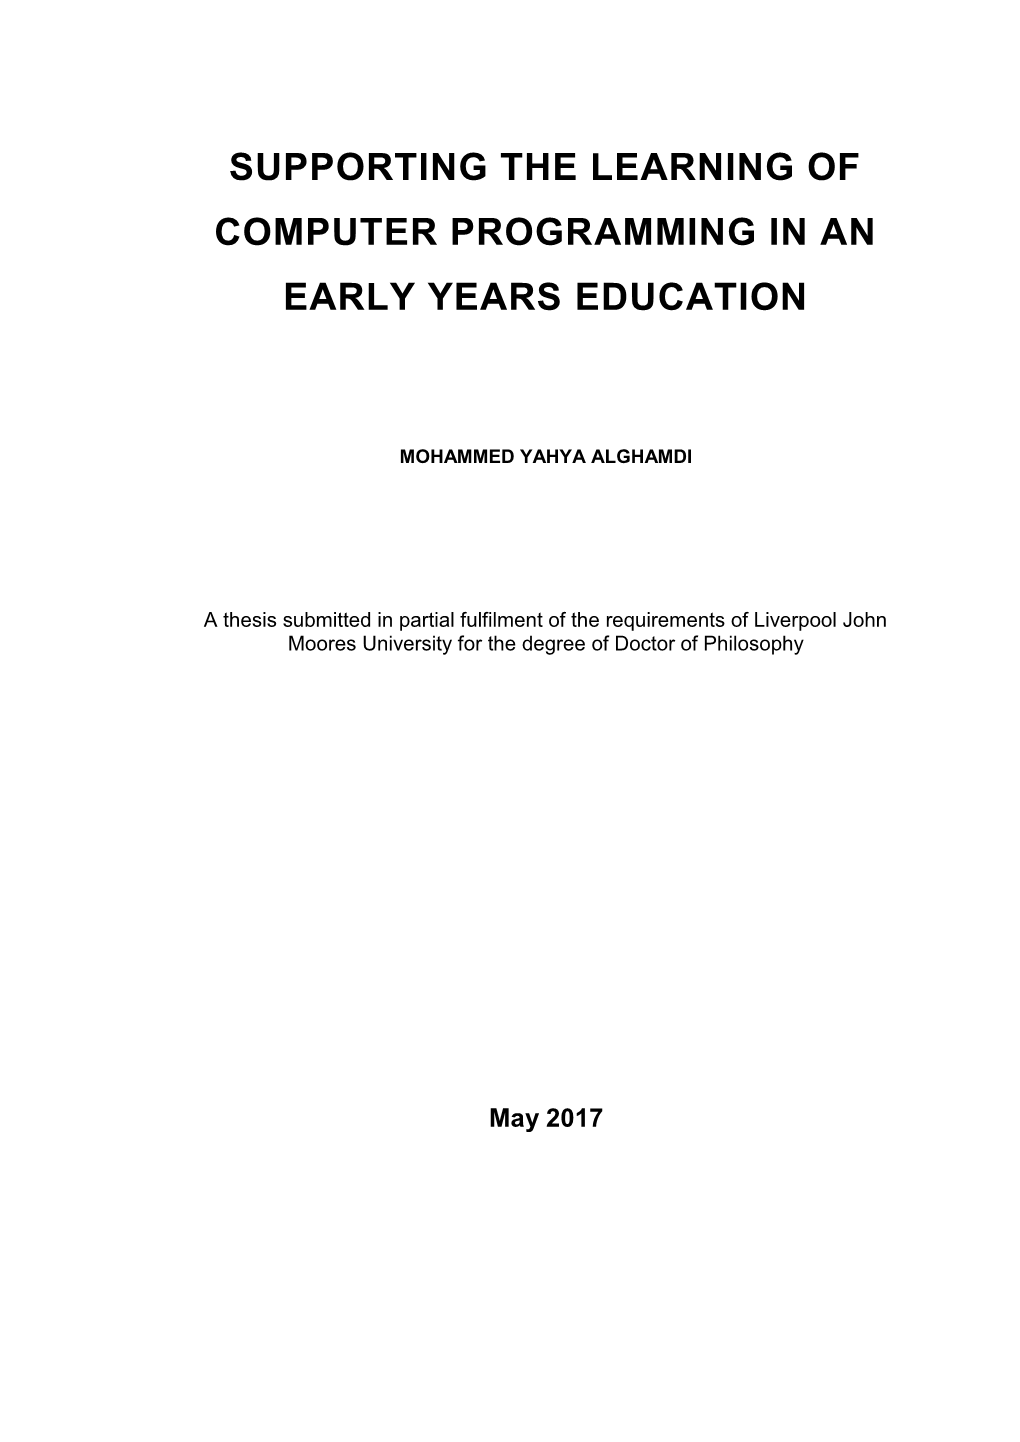 Supporting the Learning of Computer Programming in an Early Years Education